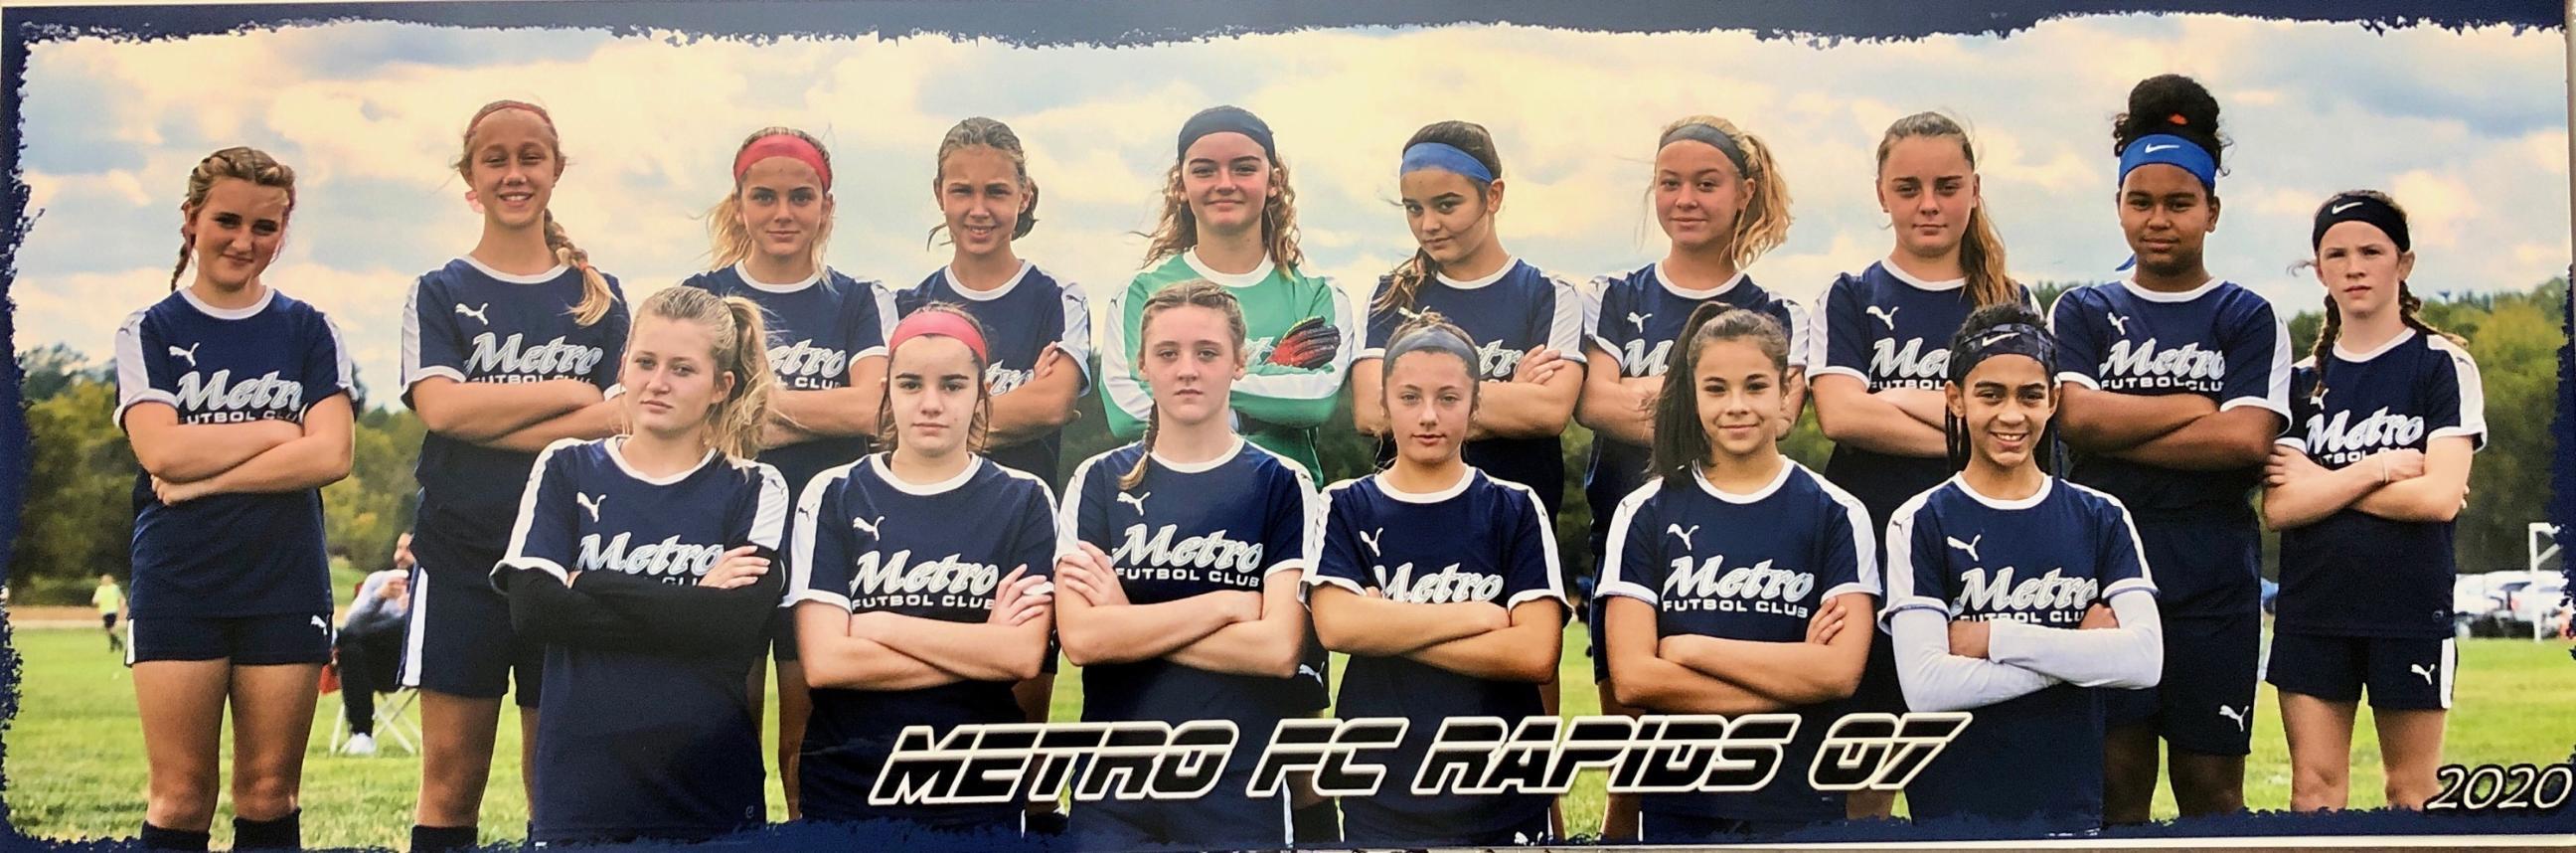 2007 Girls Rapids win Cincy Challege Gold division